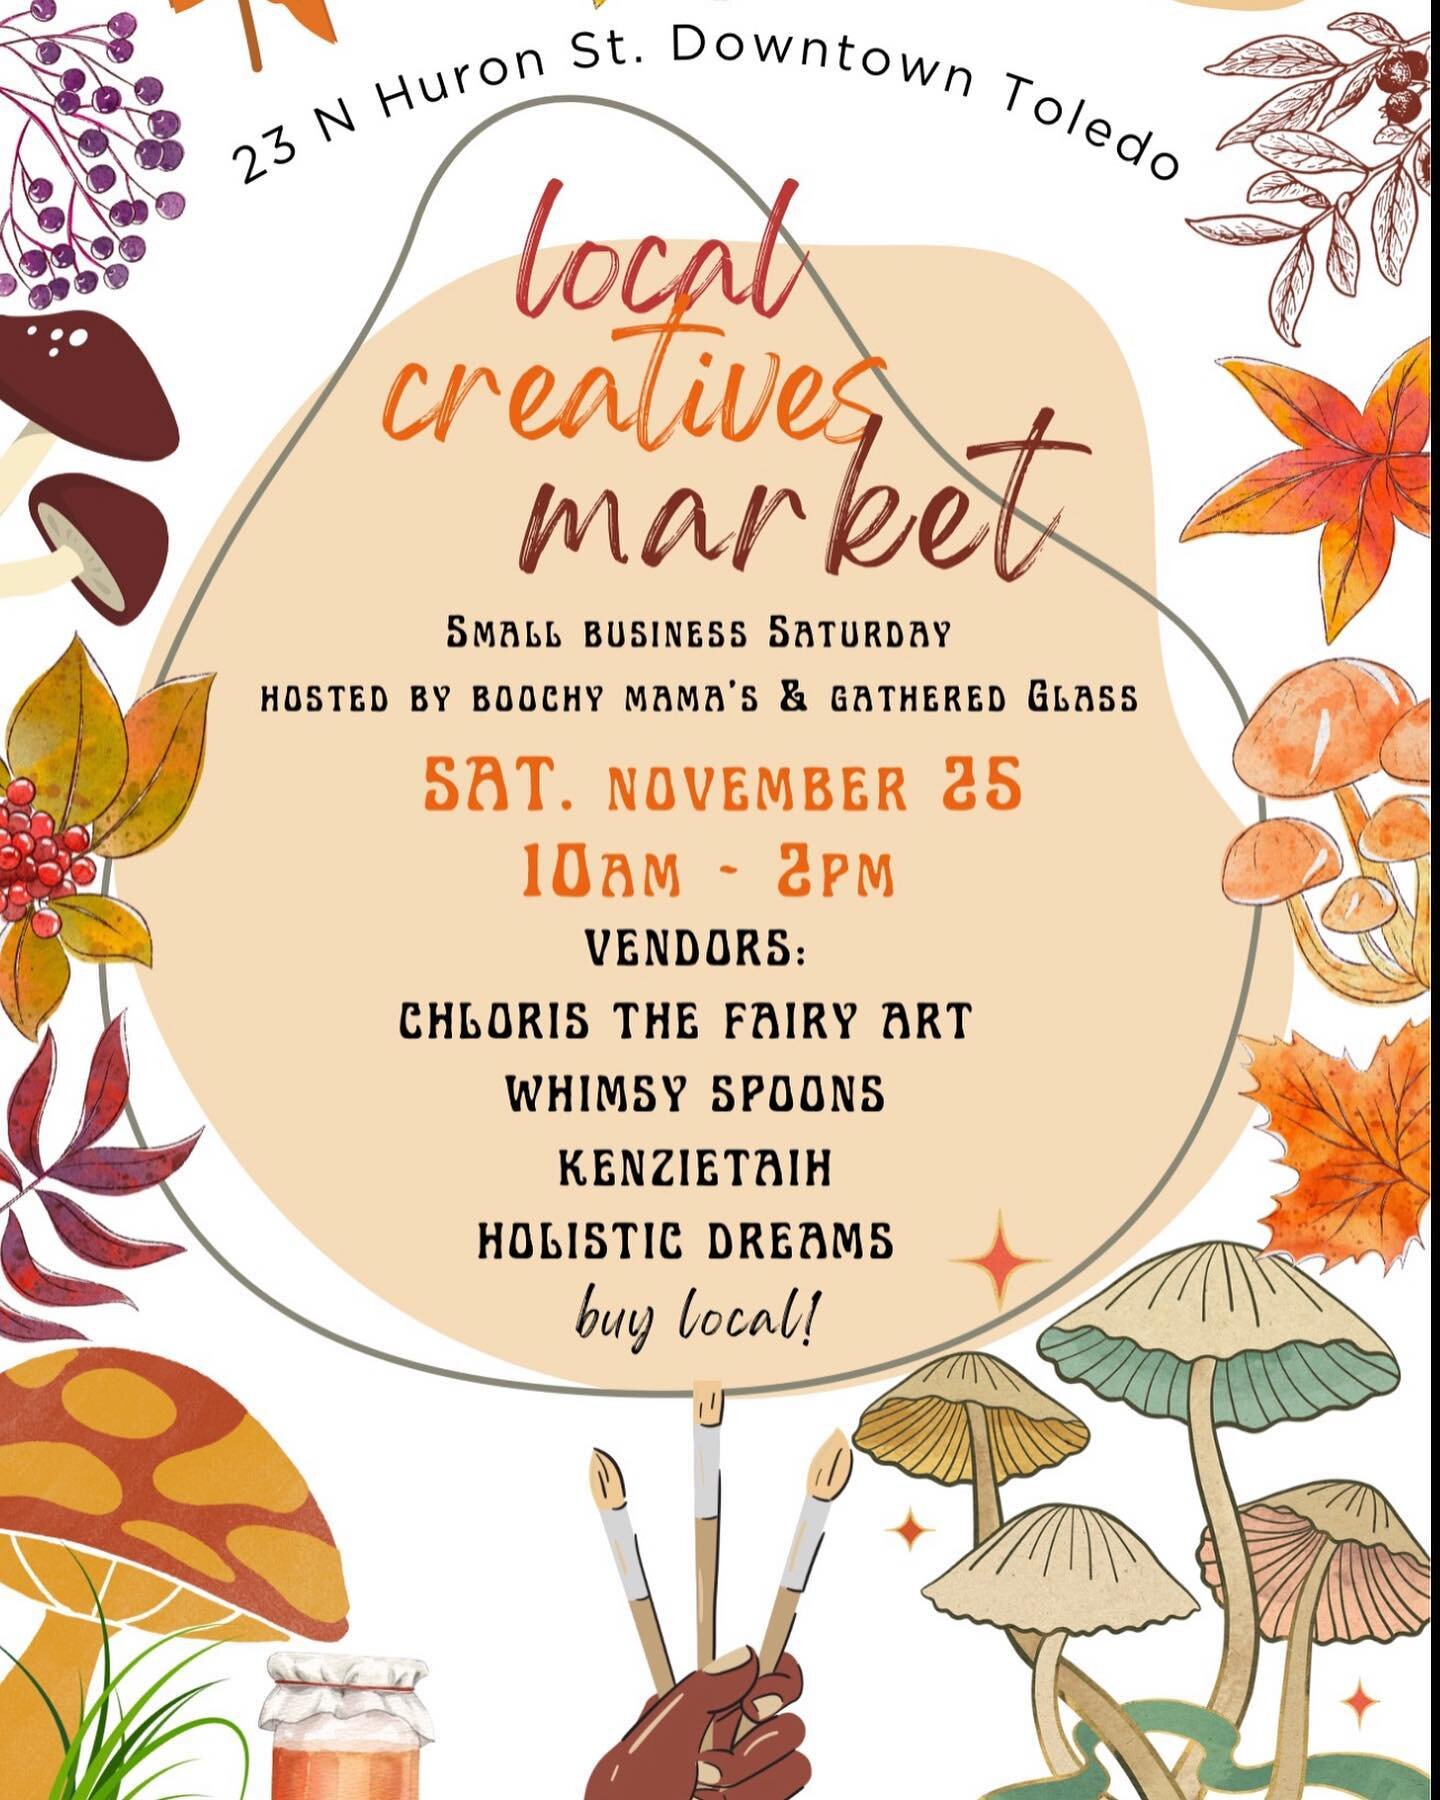 Hi friends let&rsquo;s celebrate Small Business Saturday together at Boochy Mama&rsquo;s Kombucha and @gatheredglass with a special Local Creatives Market! We&rsquo;ll have vendors set up, super cute glass ornaments, and all of our amazing seasonal k